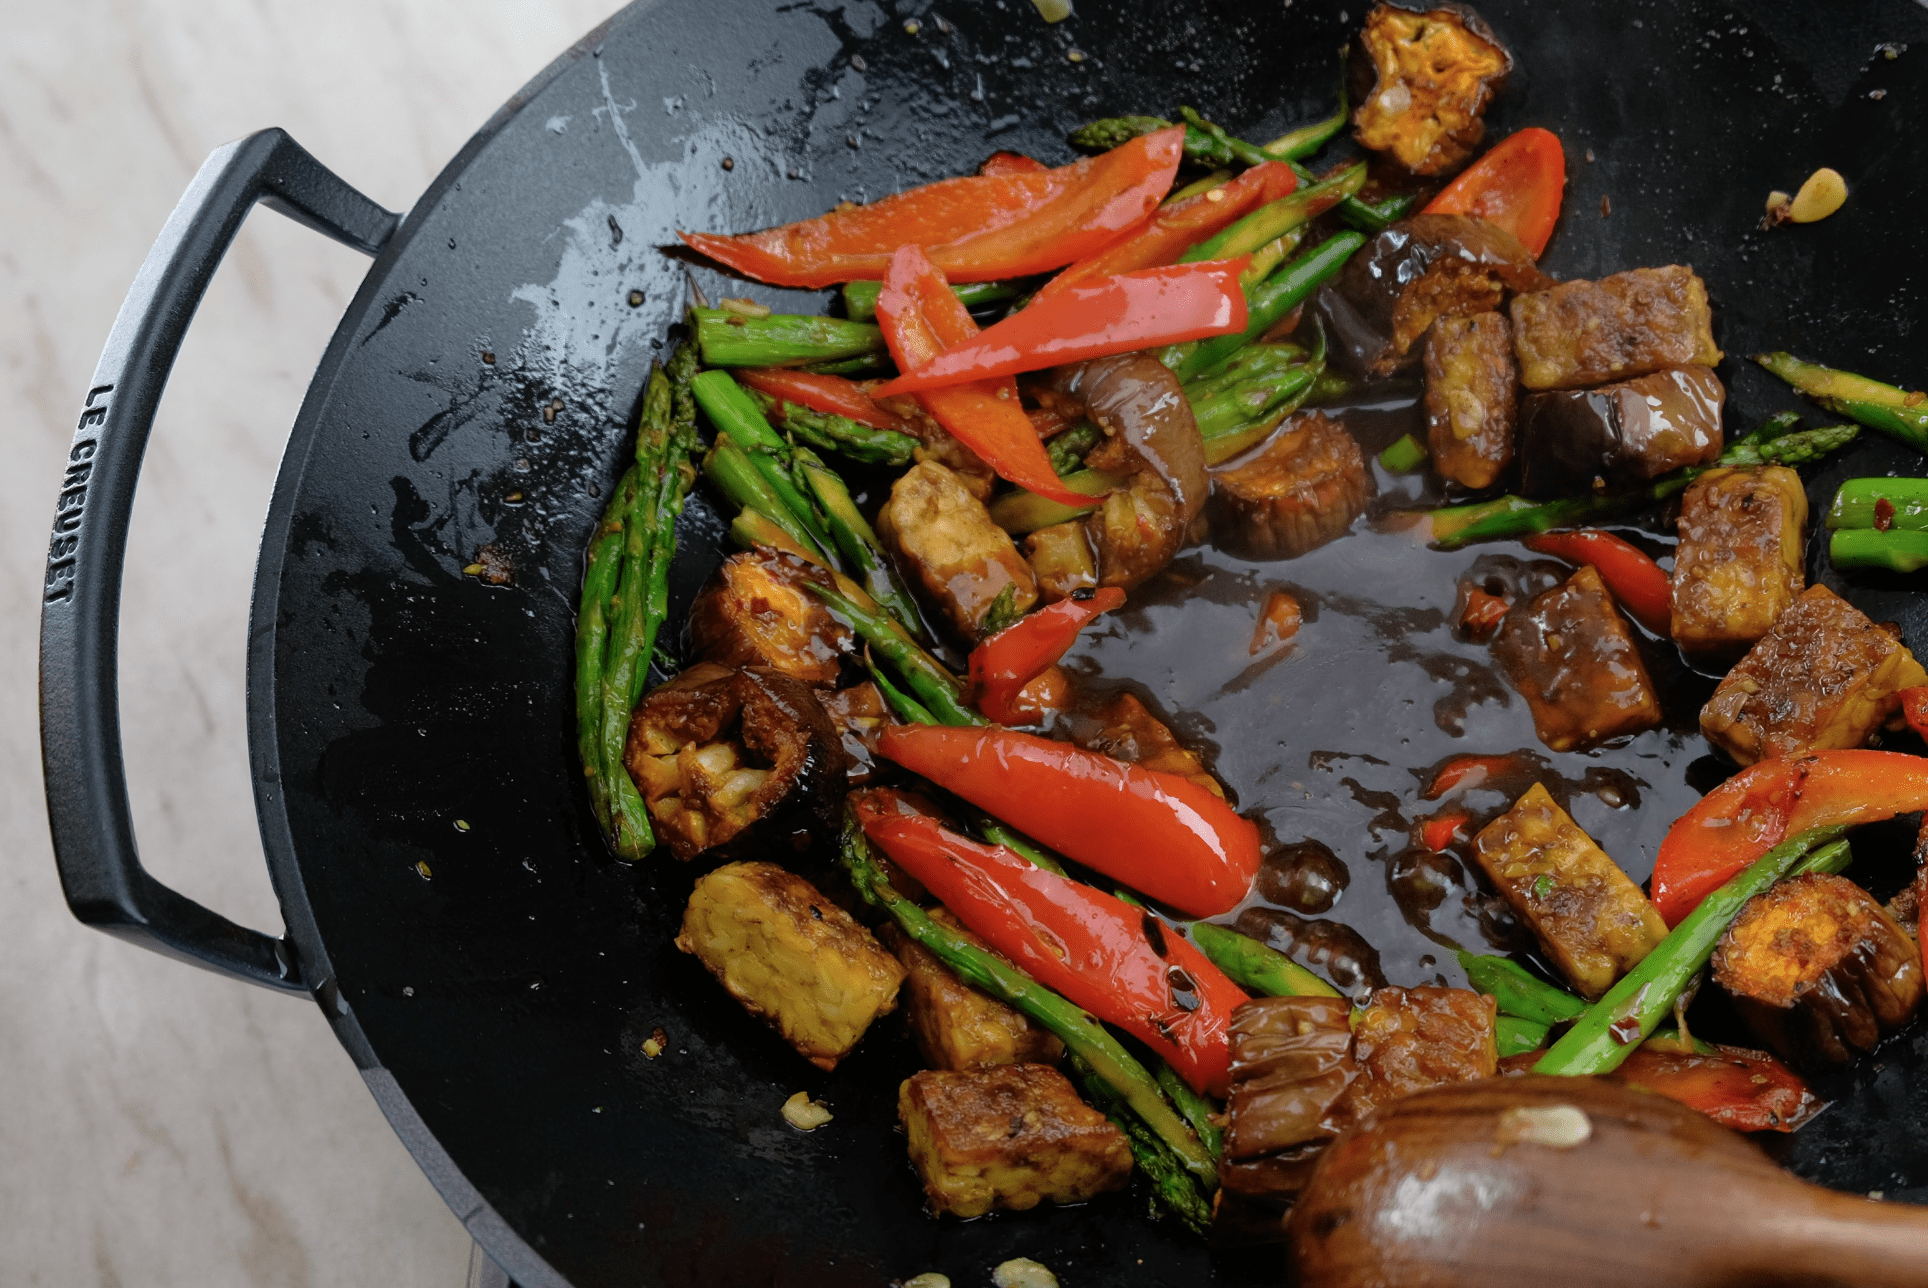 COOKED STIR FRY